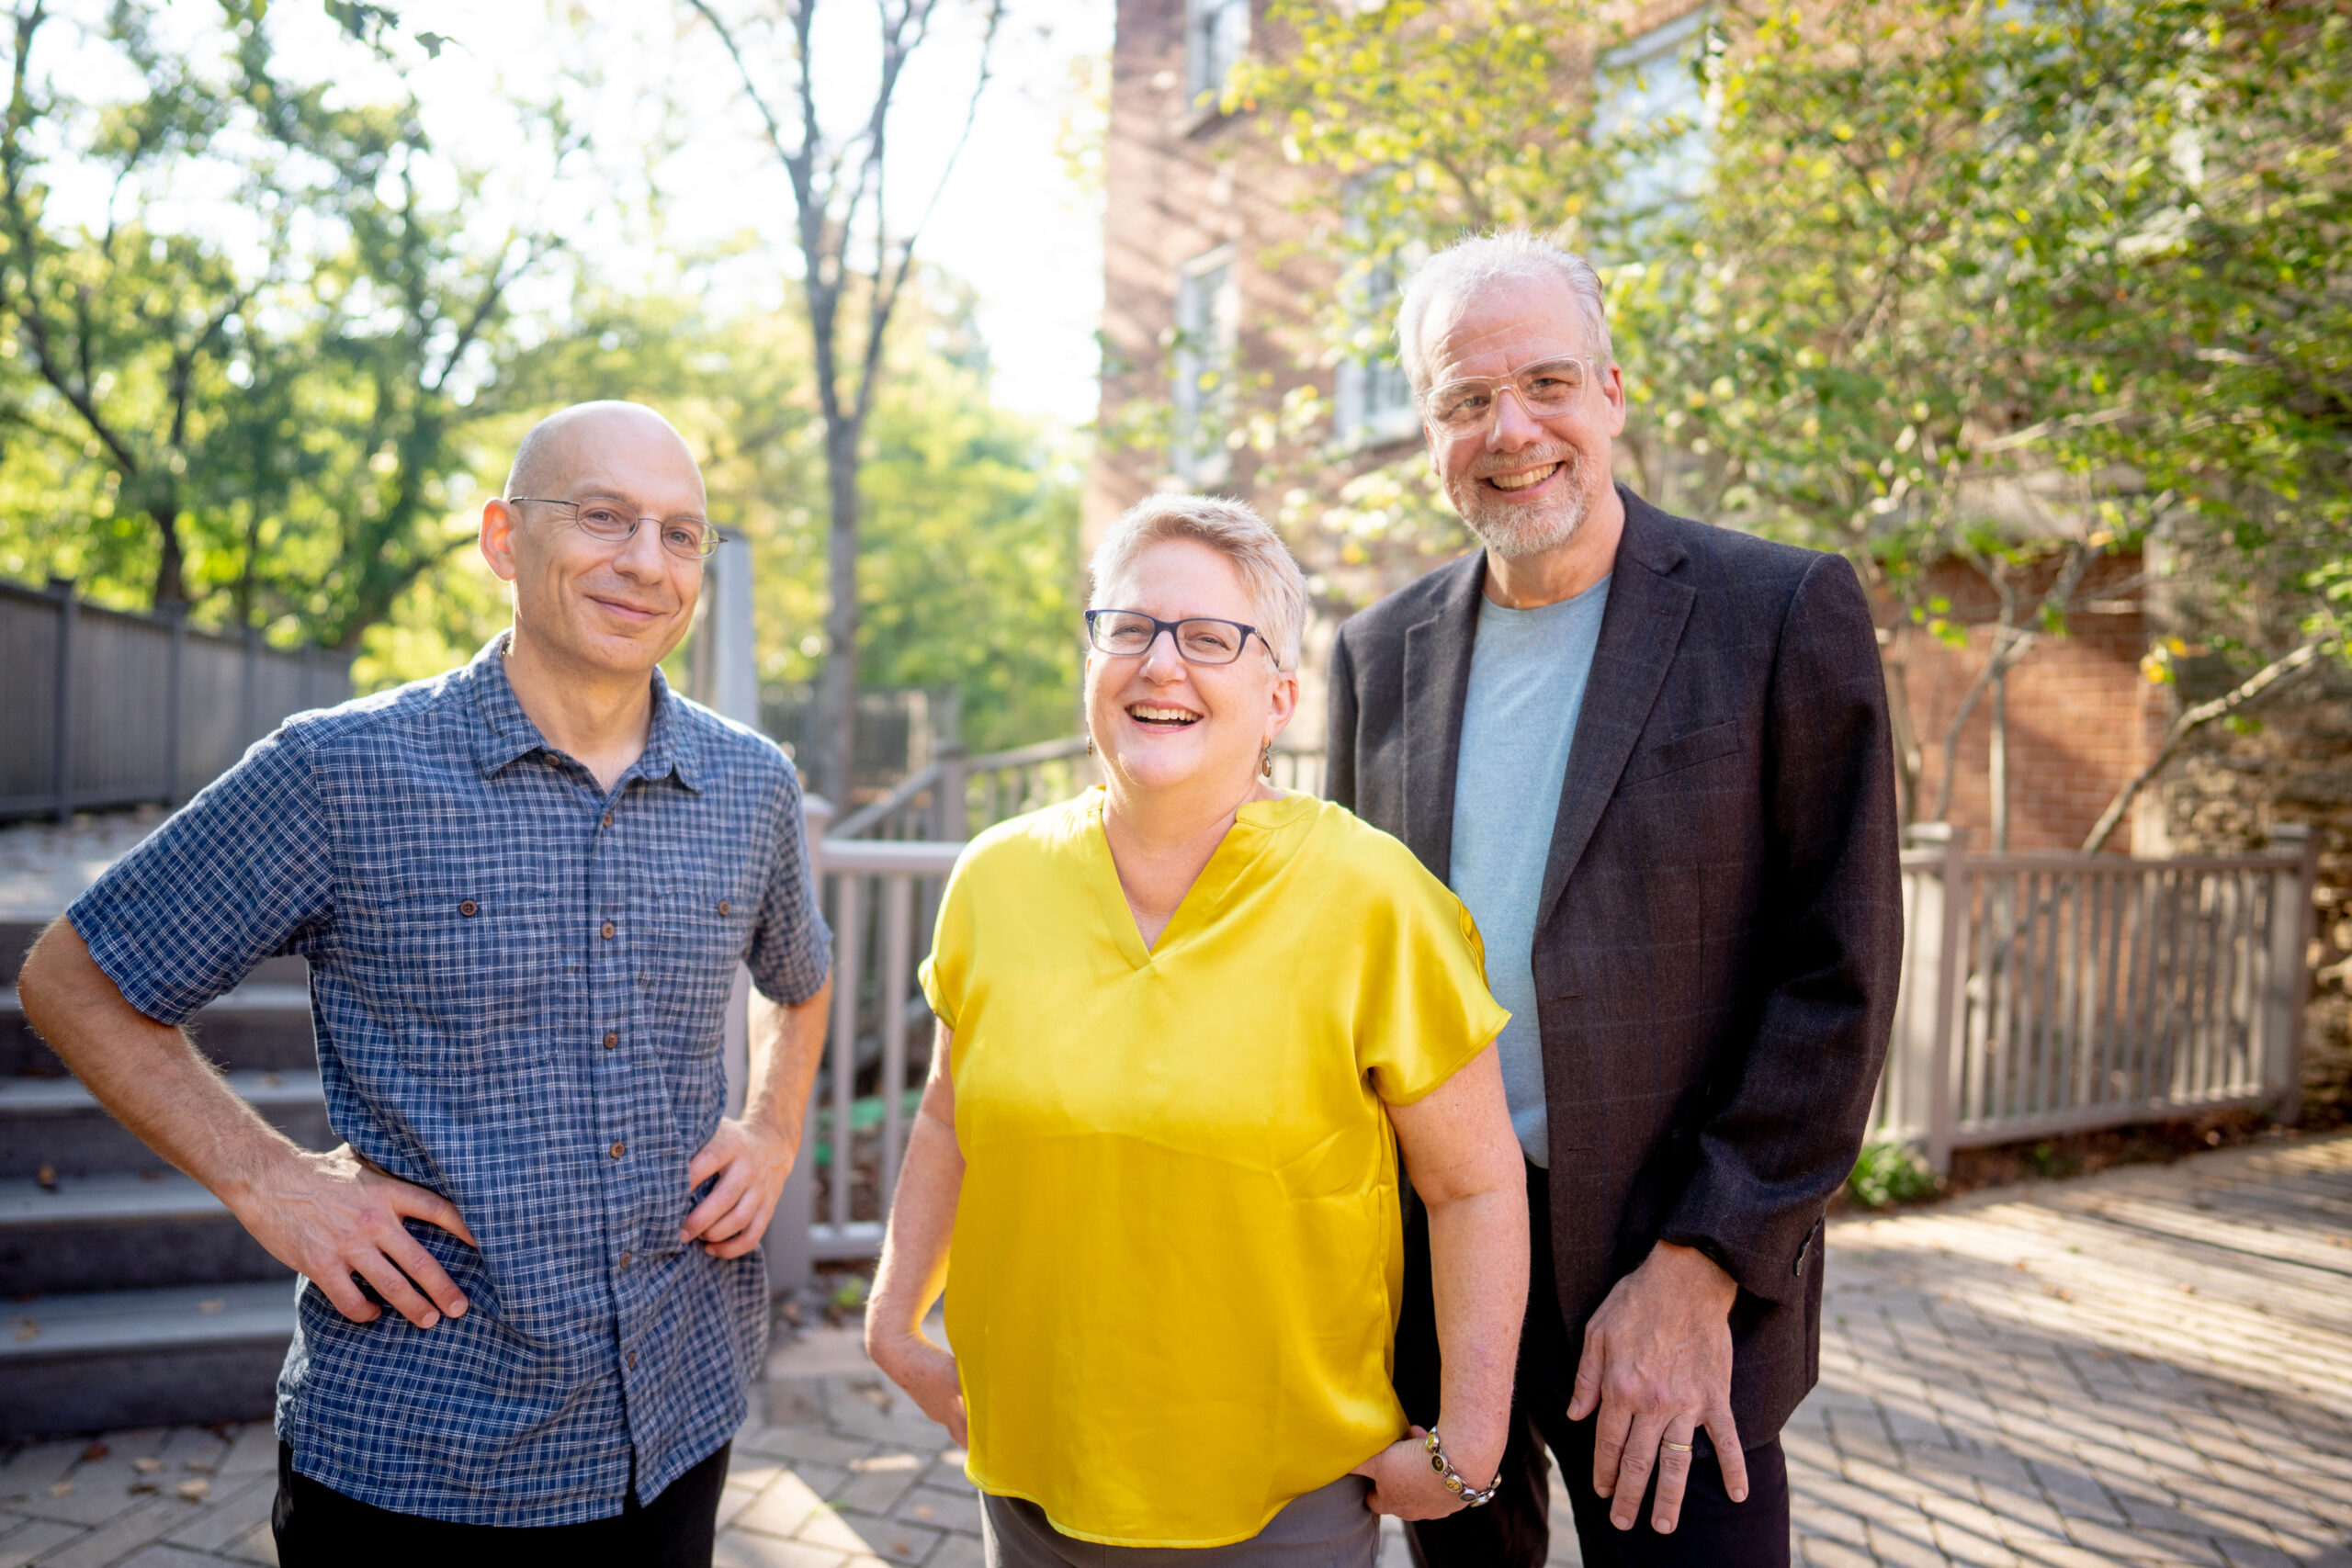 Three UGA professors awarded fellowships from the Guggenheim Foundation since 2019